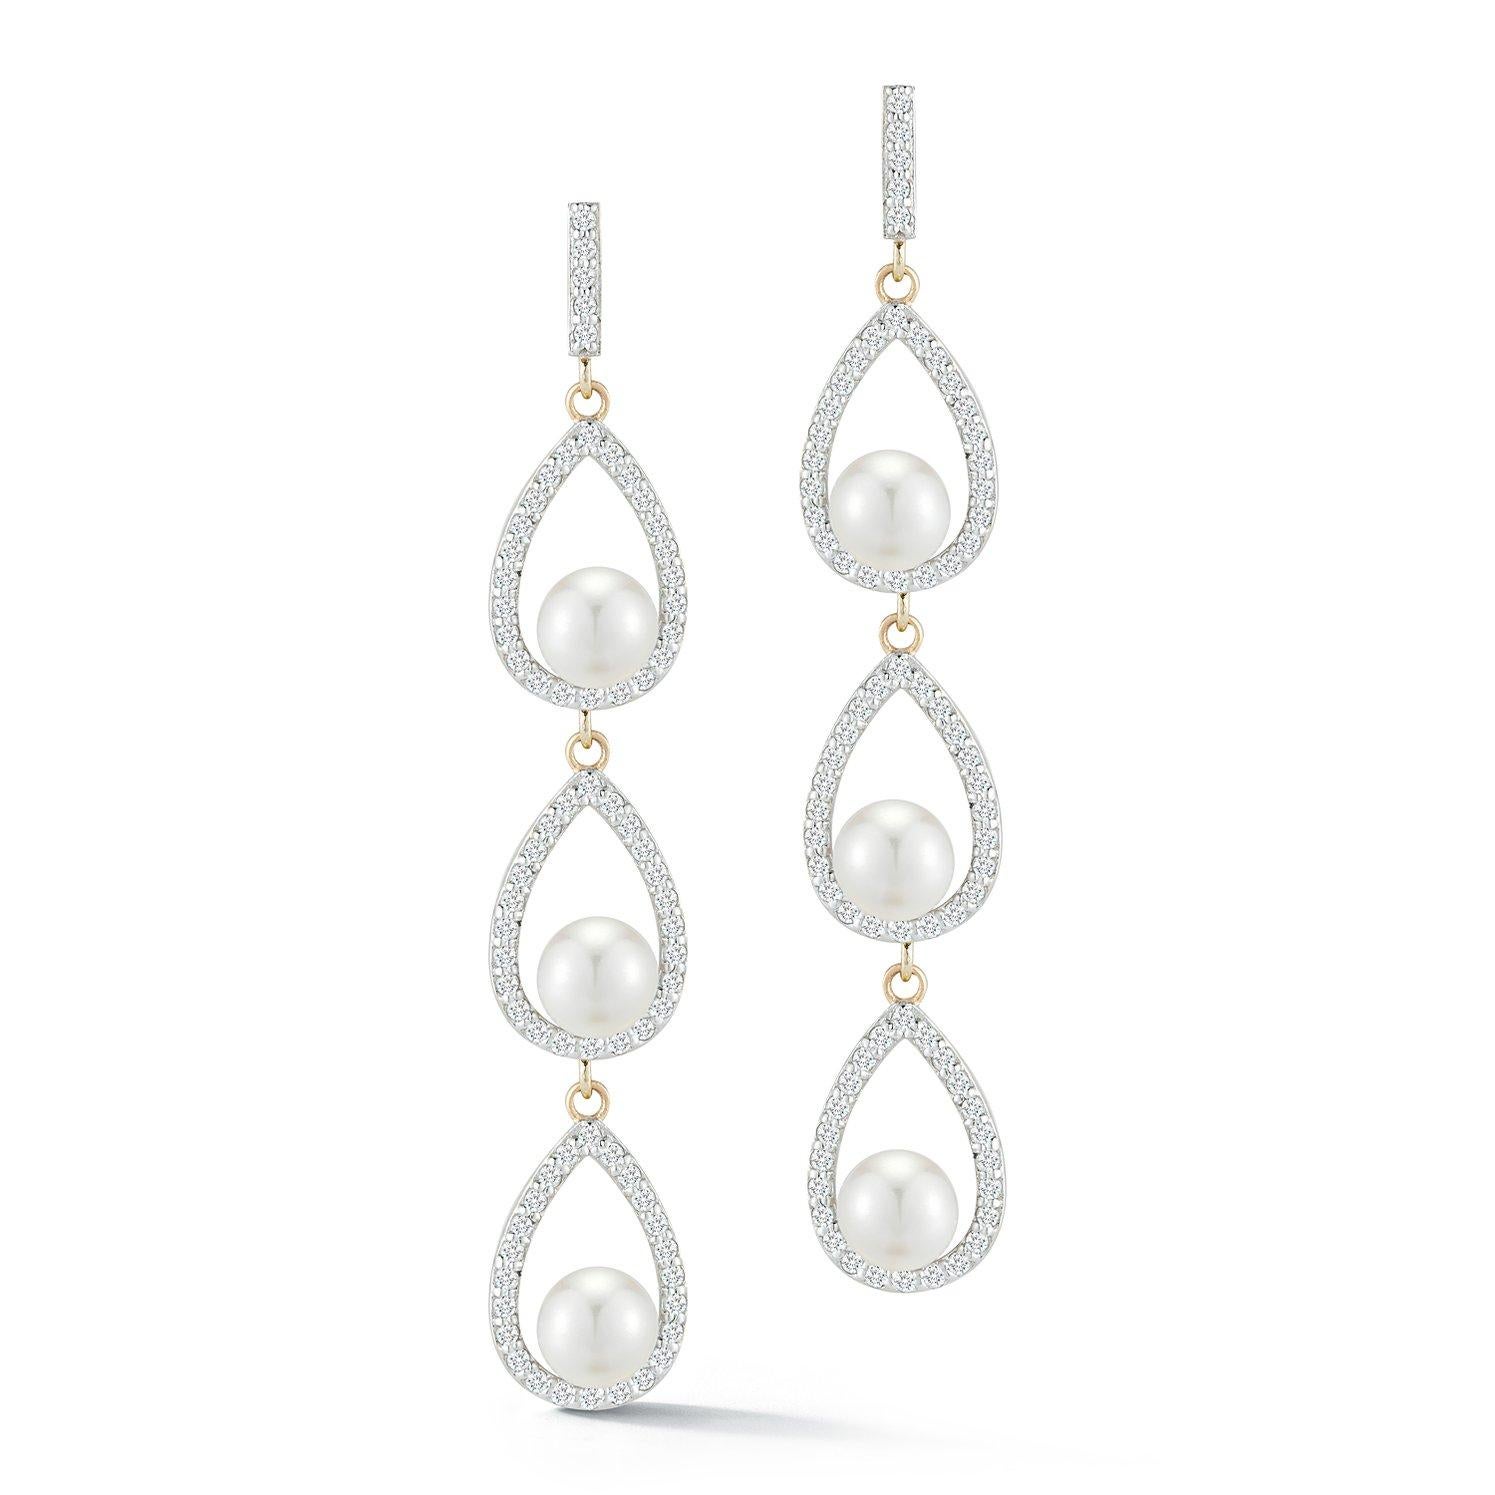 This earring is an immediate classic with its simple and timeless shape. An earring that goes perfectly from day to night.  